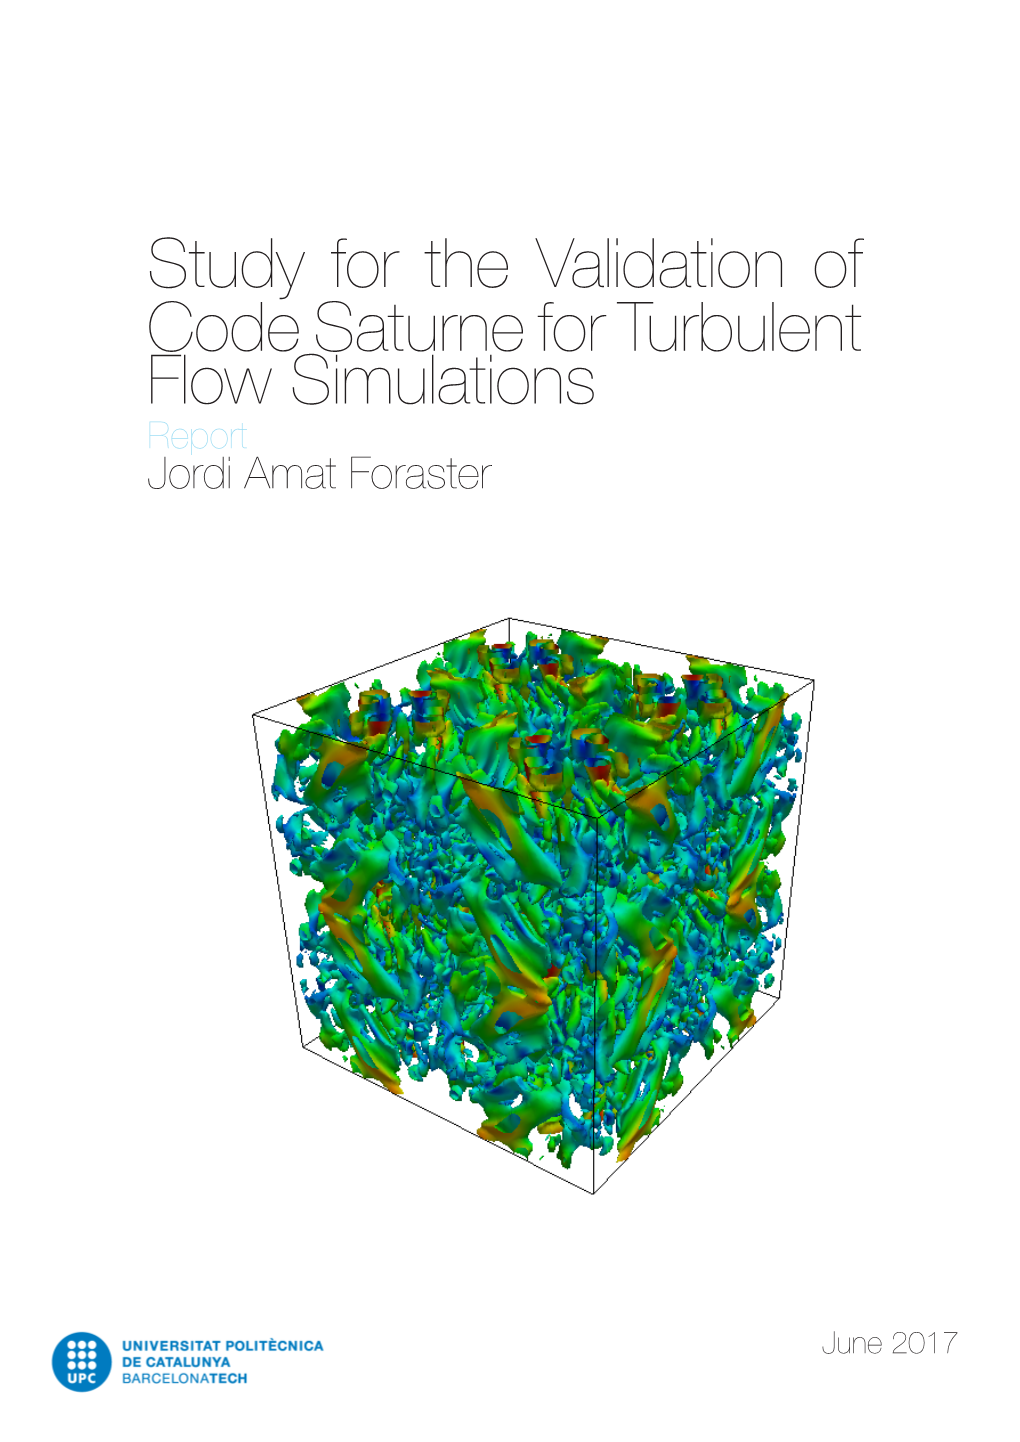 Study for the Validation of Code Saturne for Turbulent Flow Simulations Report